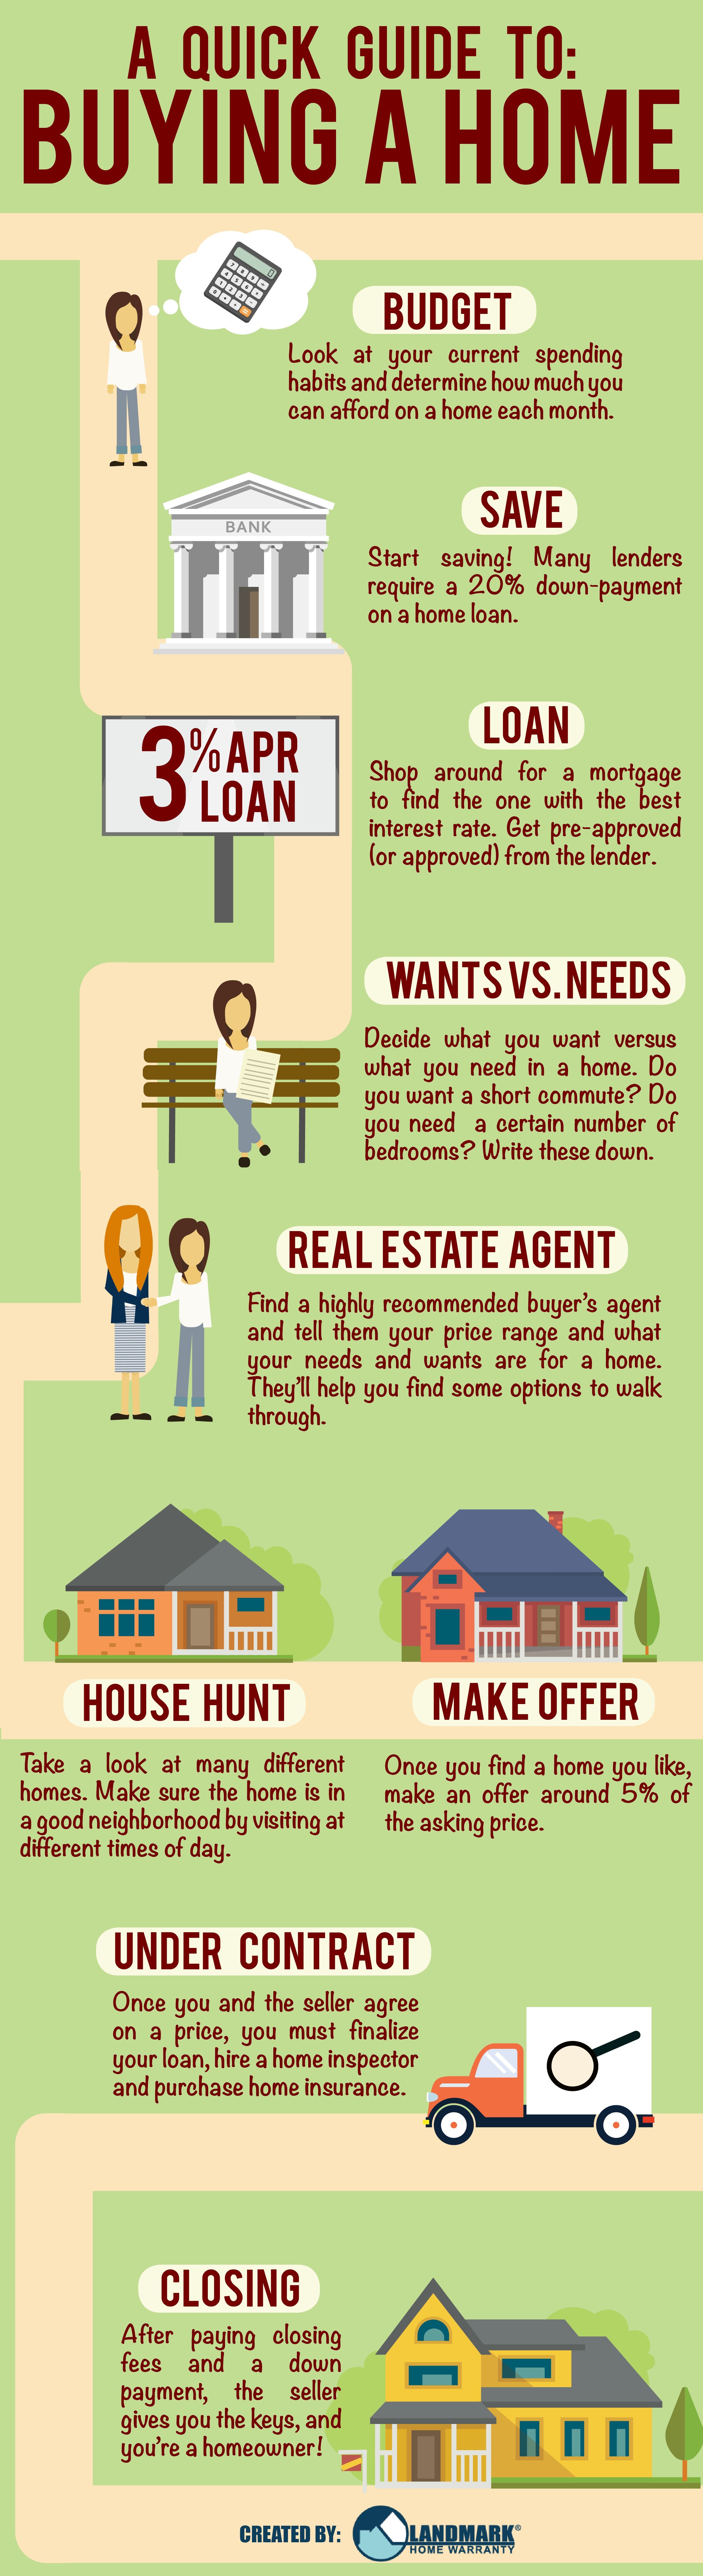 Quick guide to buying a home 2